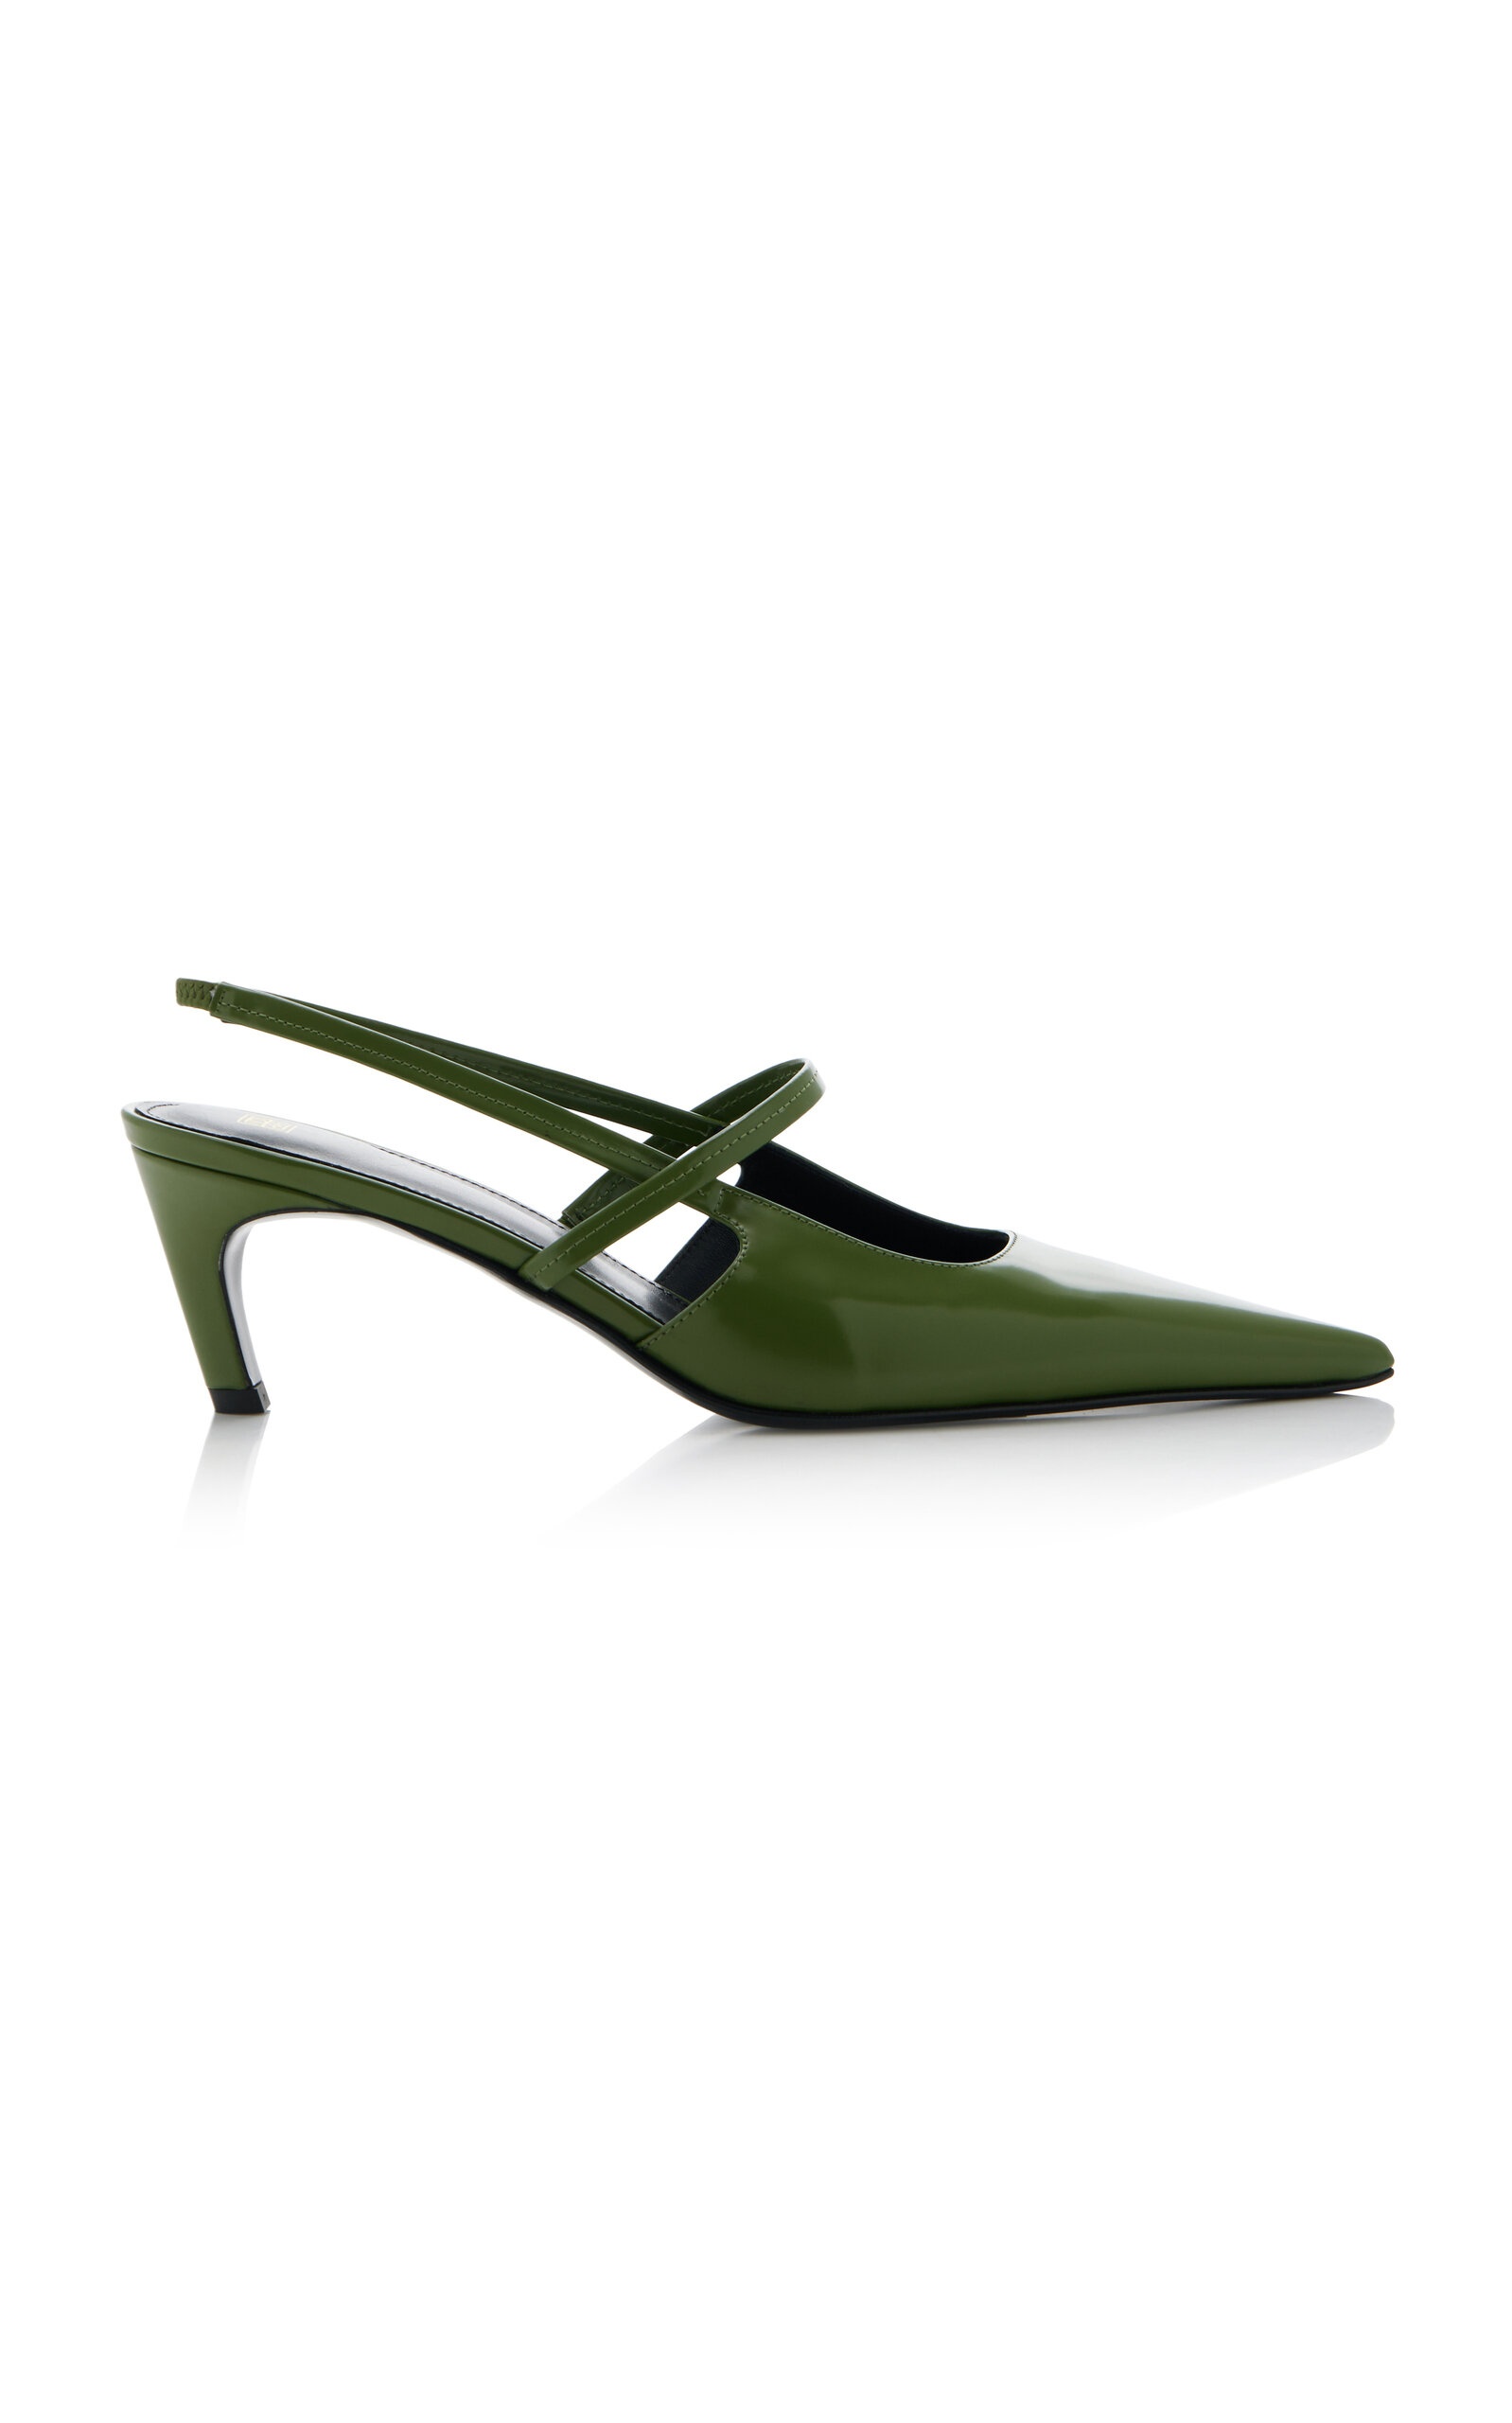 The Sharp Leather Slingback Pumps green - 1